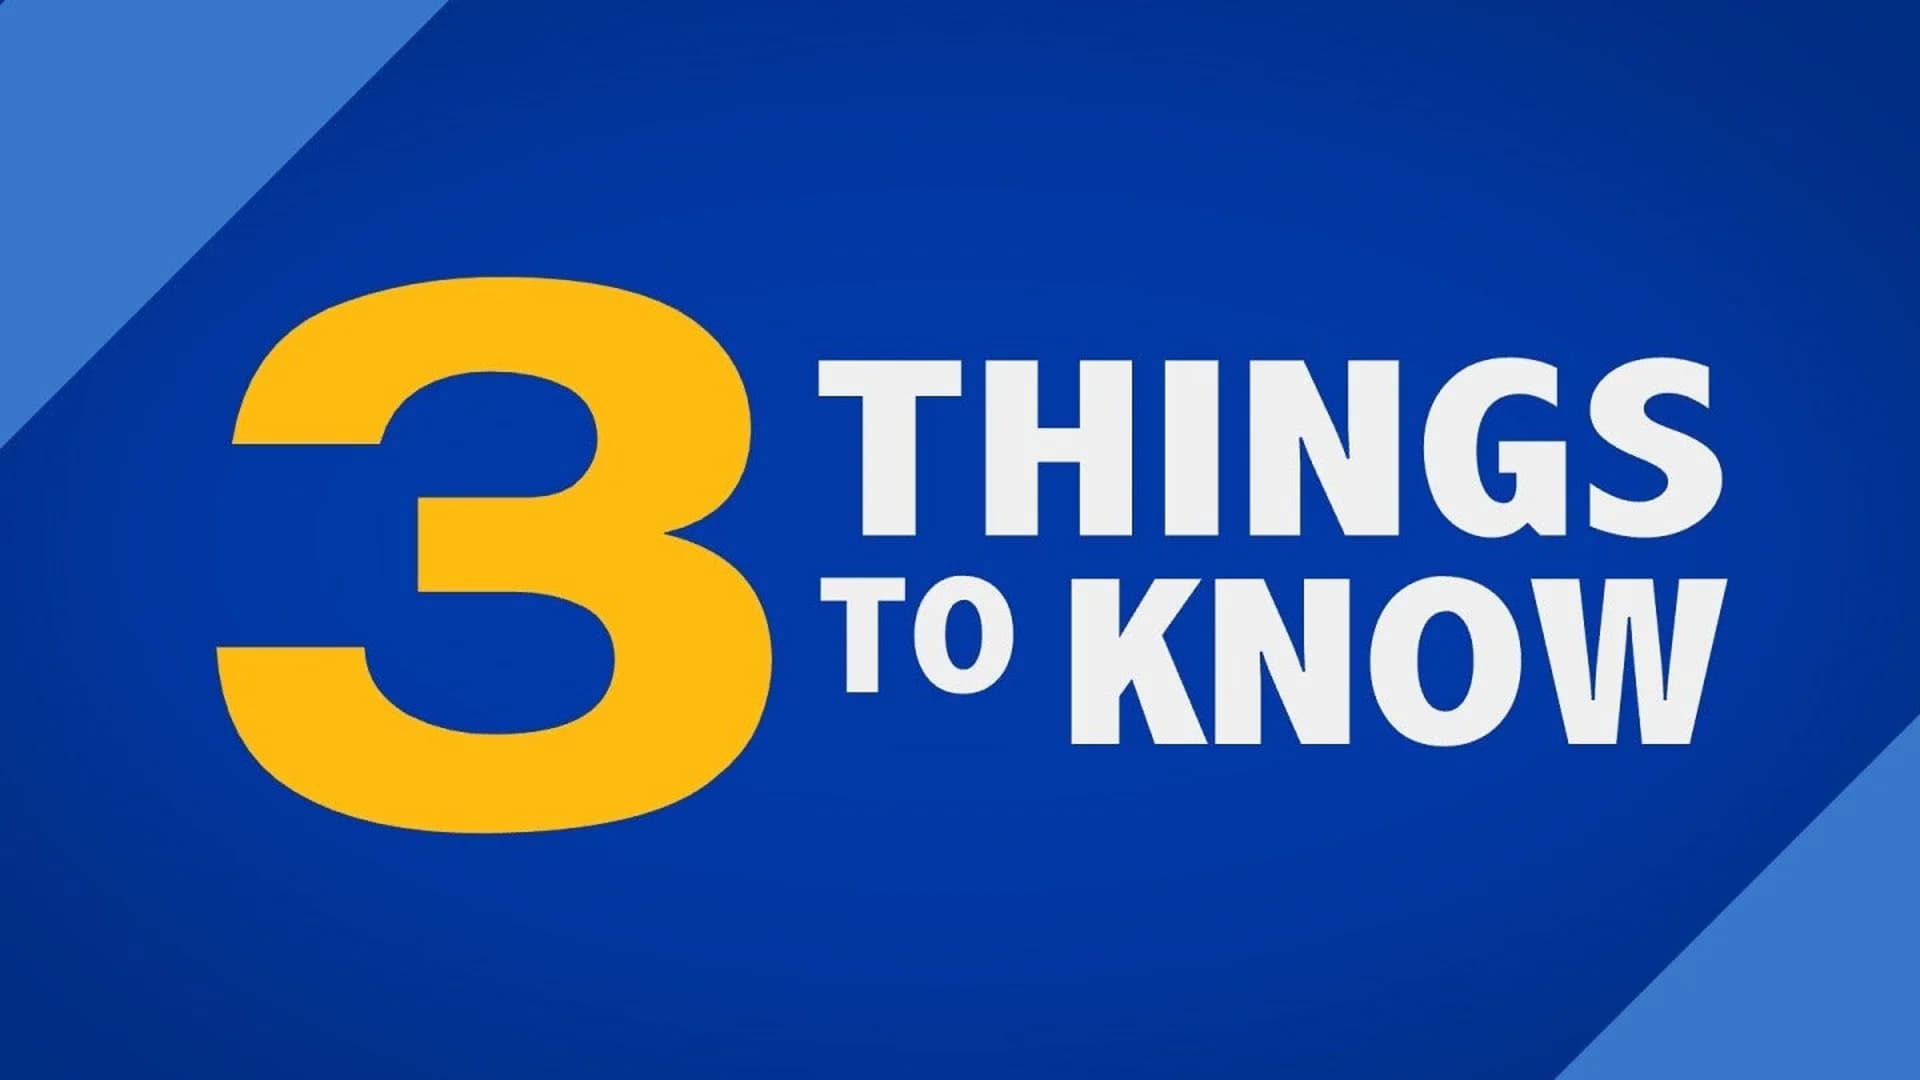 3 Things to Know – April 26, 2018